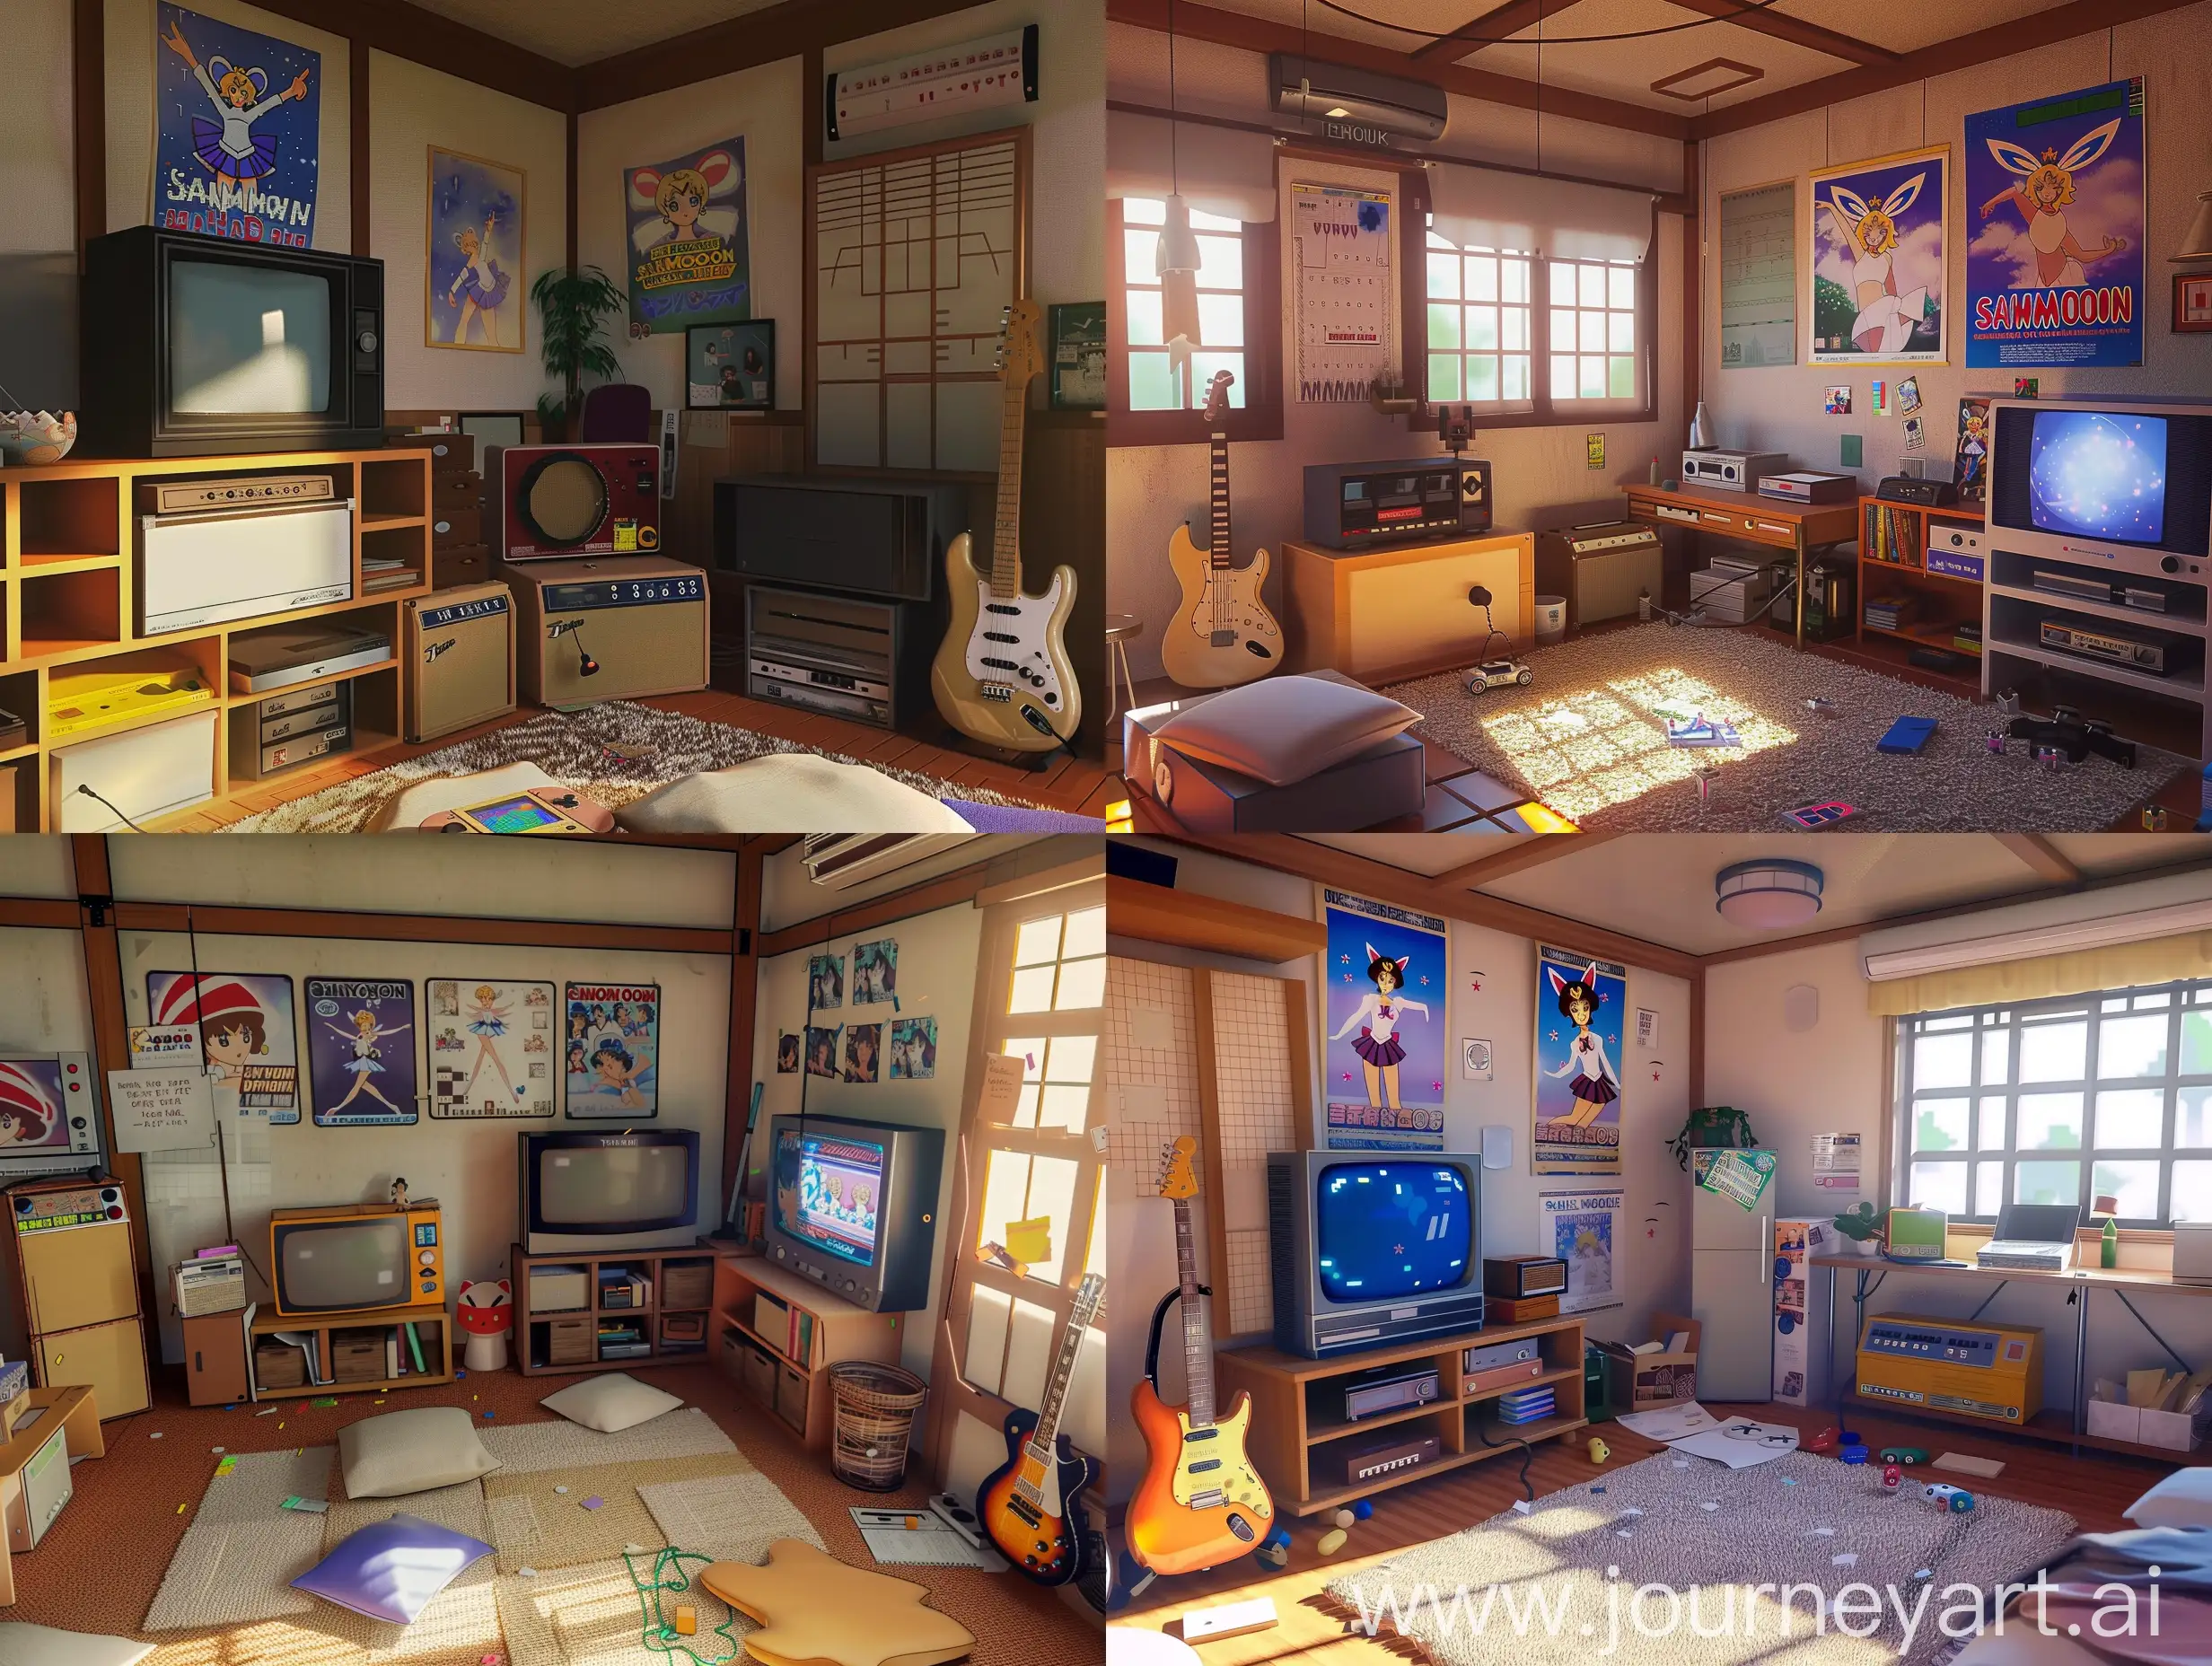 Japanese-style room, retro Nintendo games, pixel graphics, Sailor Moon posters on the wall, electric guitar and retro TV